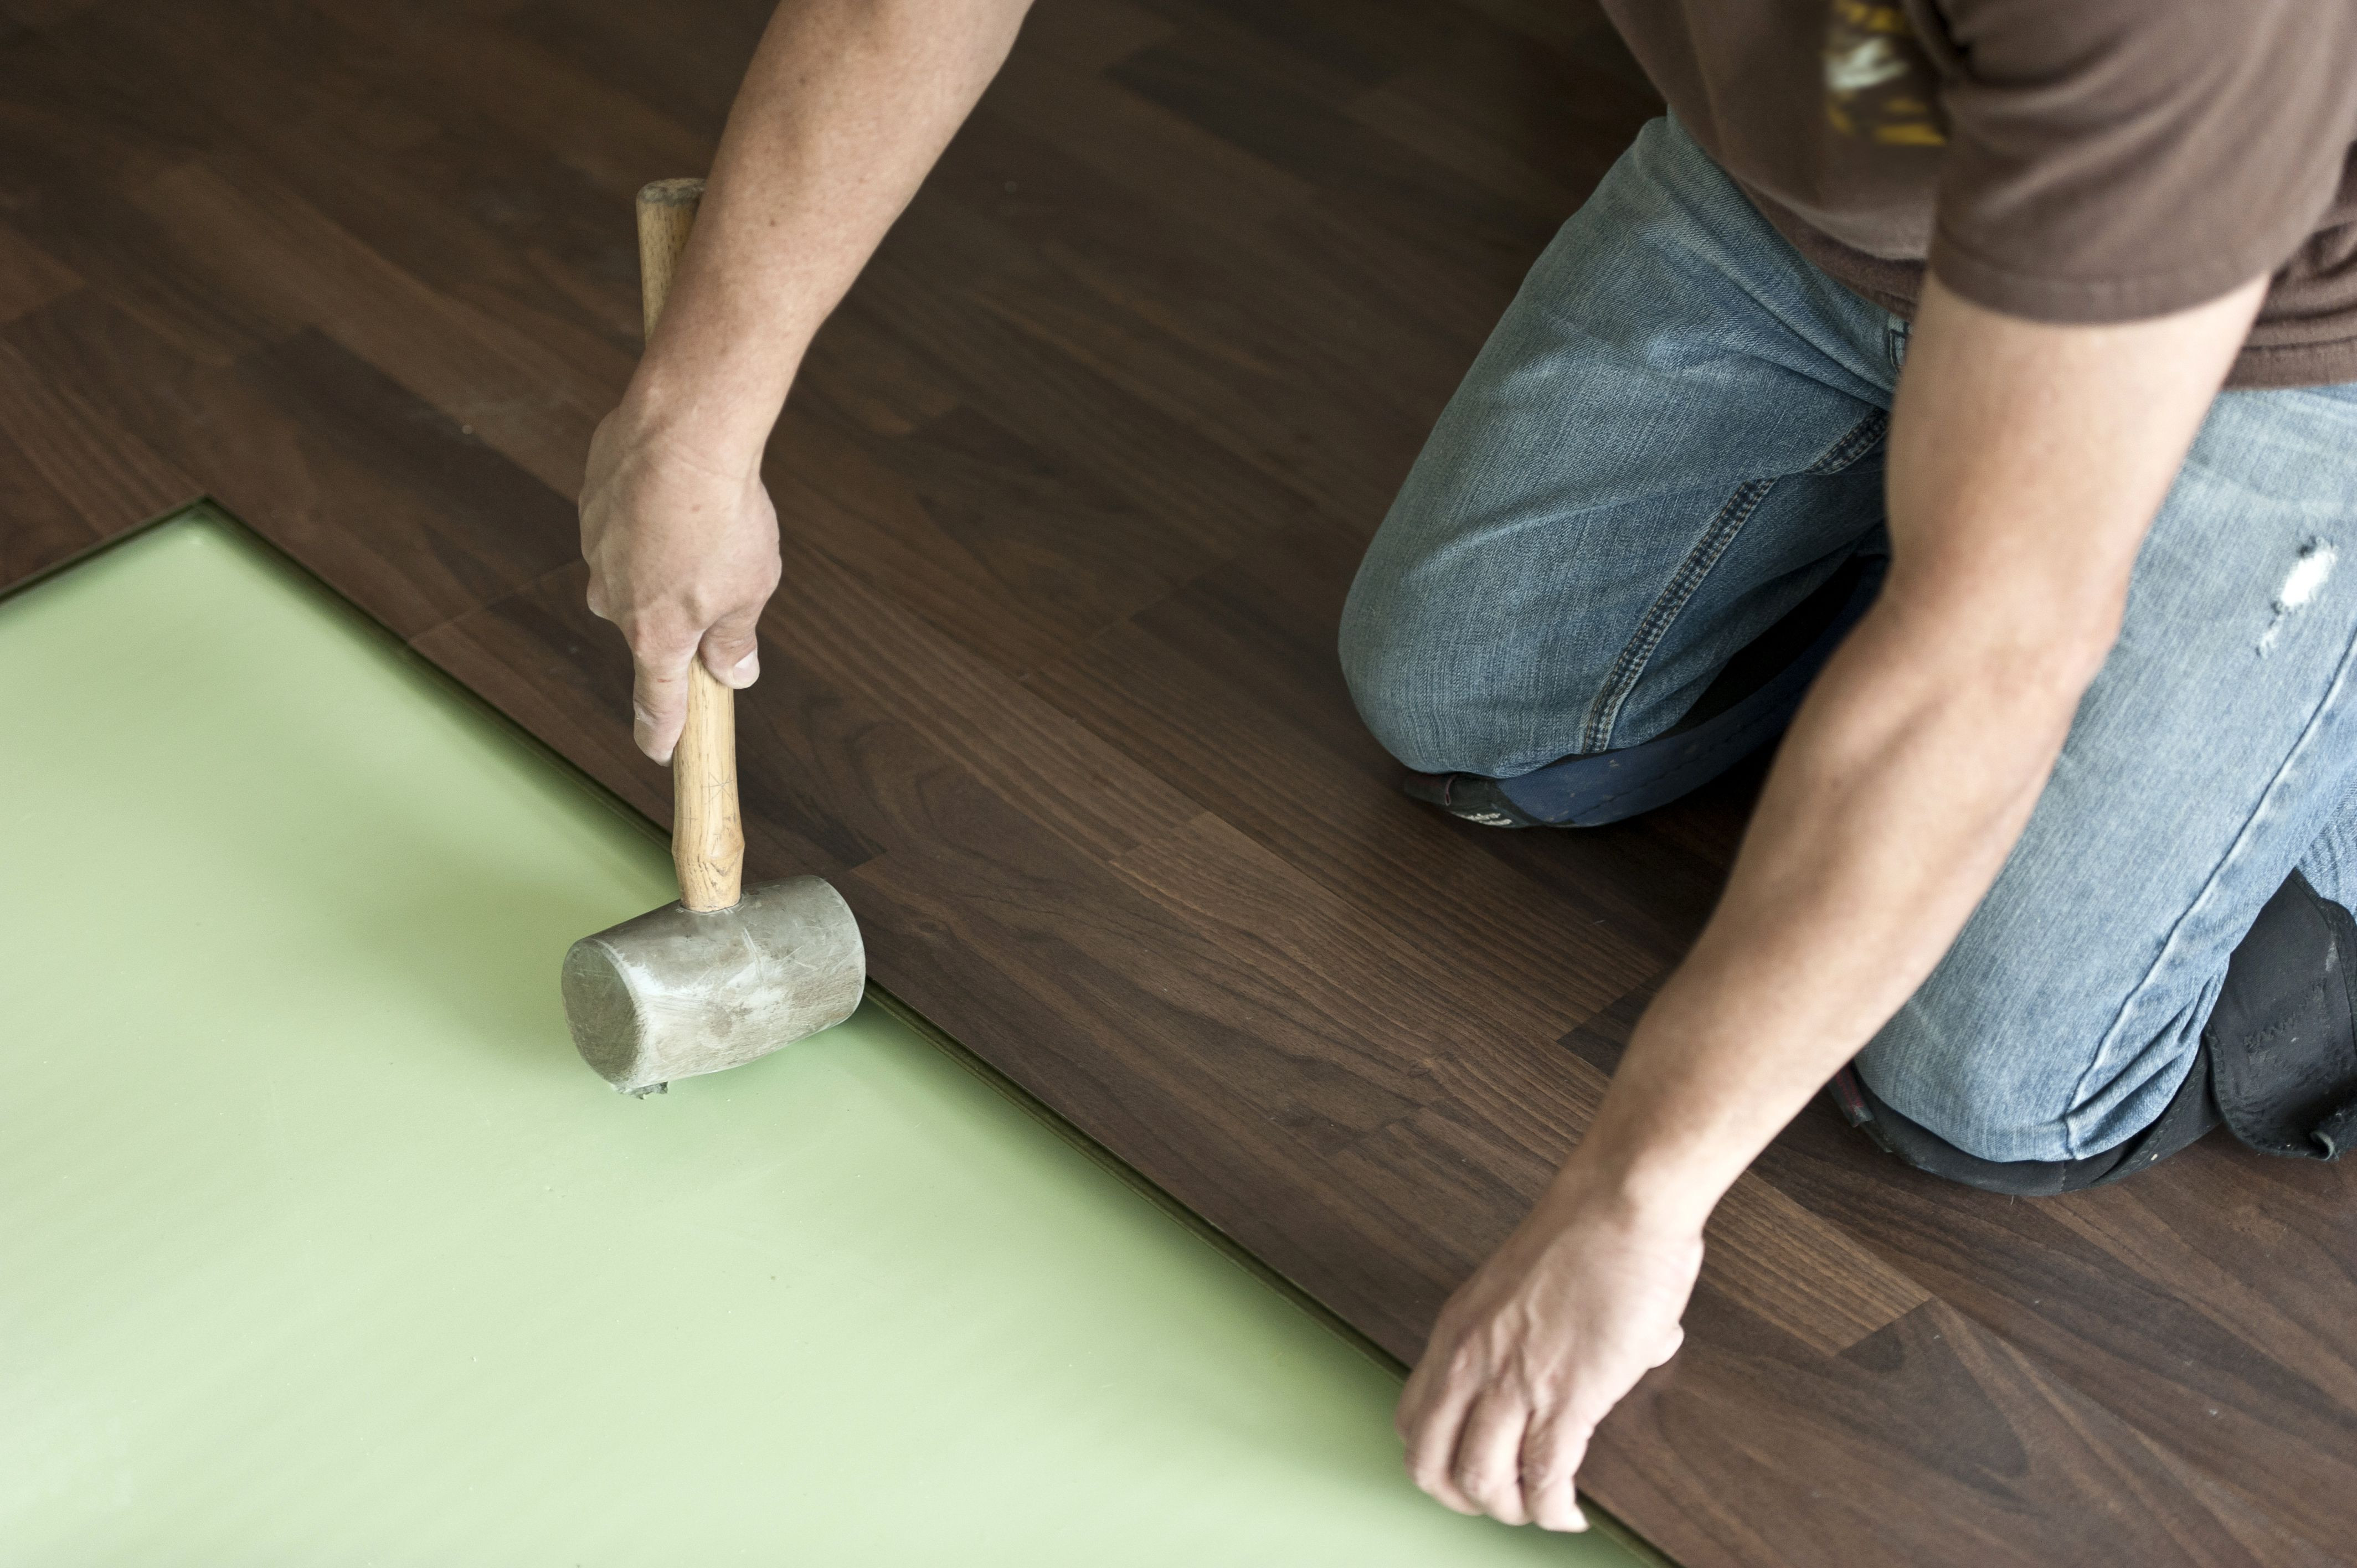 20 Great Can You Install solid Hardwood Floors On Concrete 2024 free download can you install solid hardwood floors on concrete of can a foam pad be use under solid hardwood flooring within installing hardwood floor 155149312 57e967d45f9b586c35ade84a